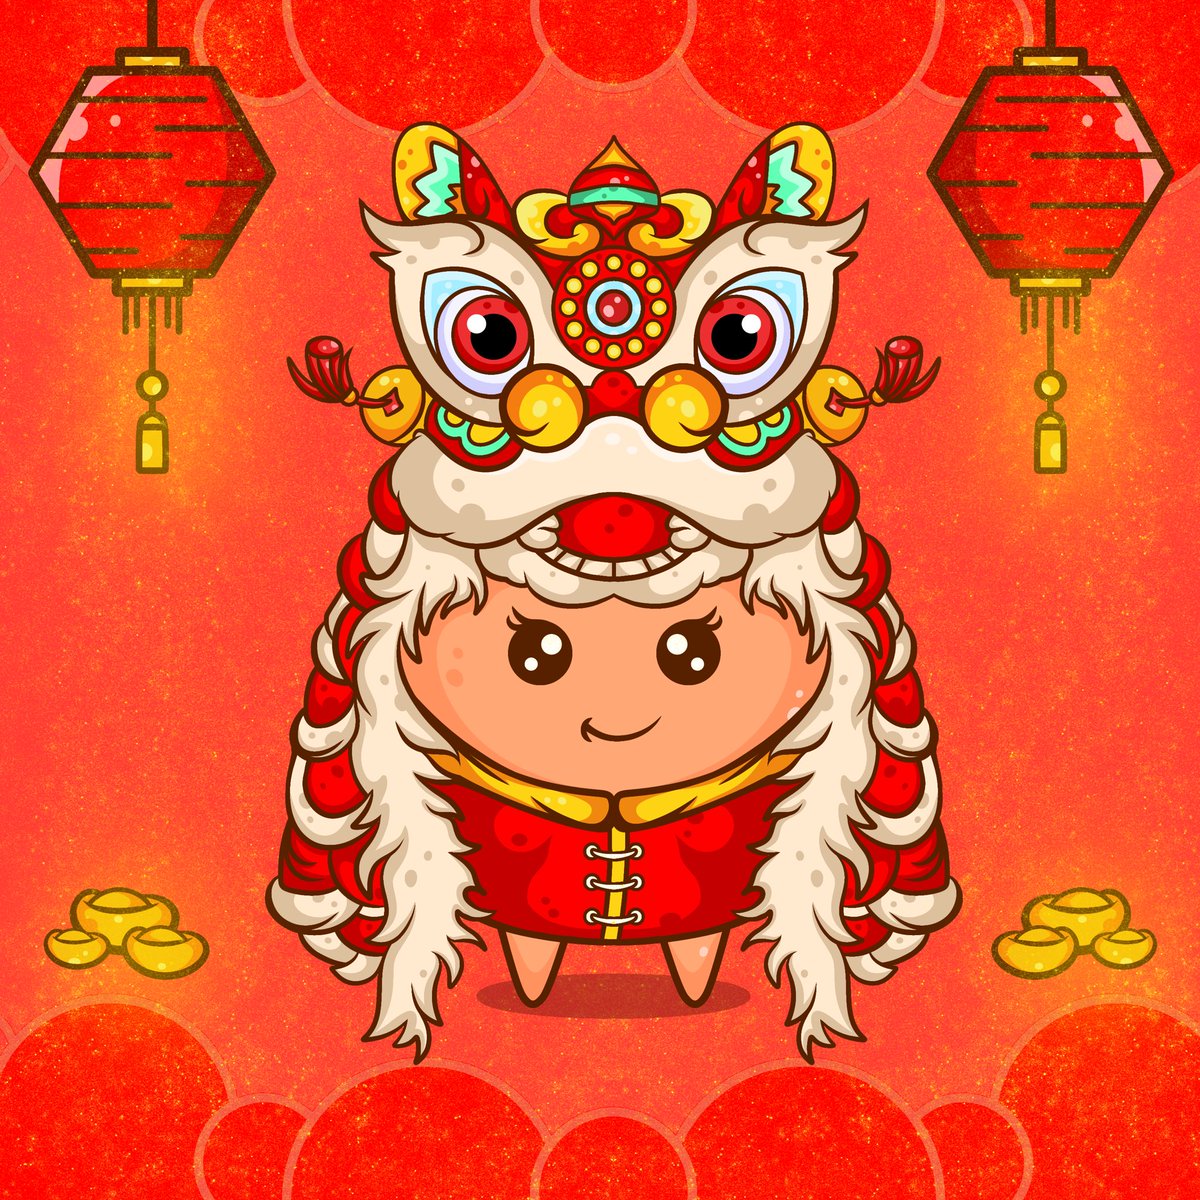 NEW DROP💗

SPECIAL CHINESE NEW YEAR 2023  Eggnion #220✨
Lets Join Eggnion Fam 💕
Link Eggnion #220 ✨
opensea.io/assets/matic/0…

Don't miss out, grab it now 💕🤗

#NFT #CNY2023 #NFTCommunity #NFTcollections